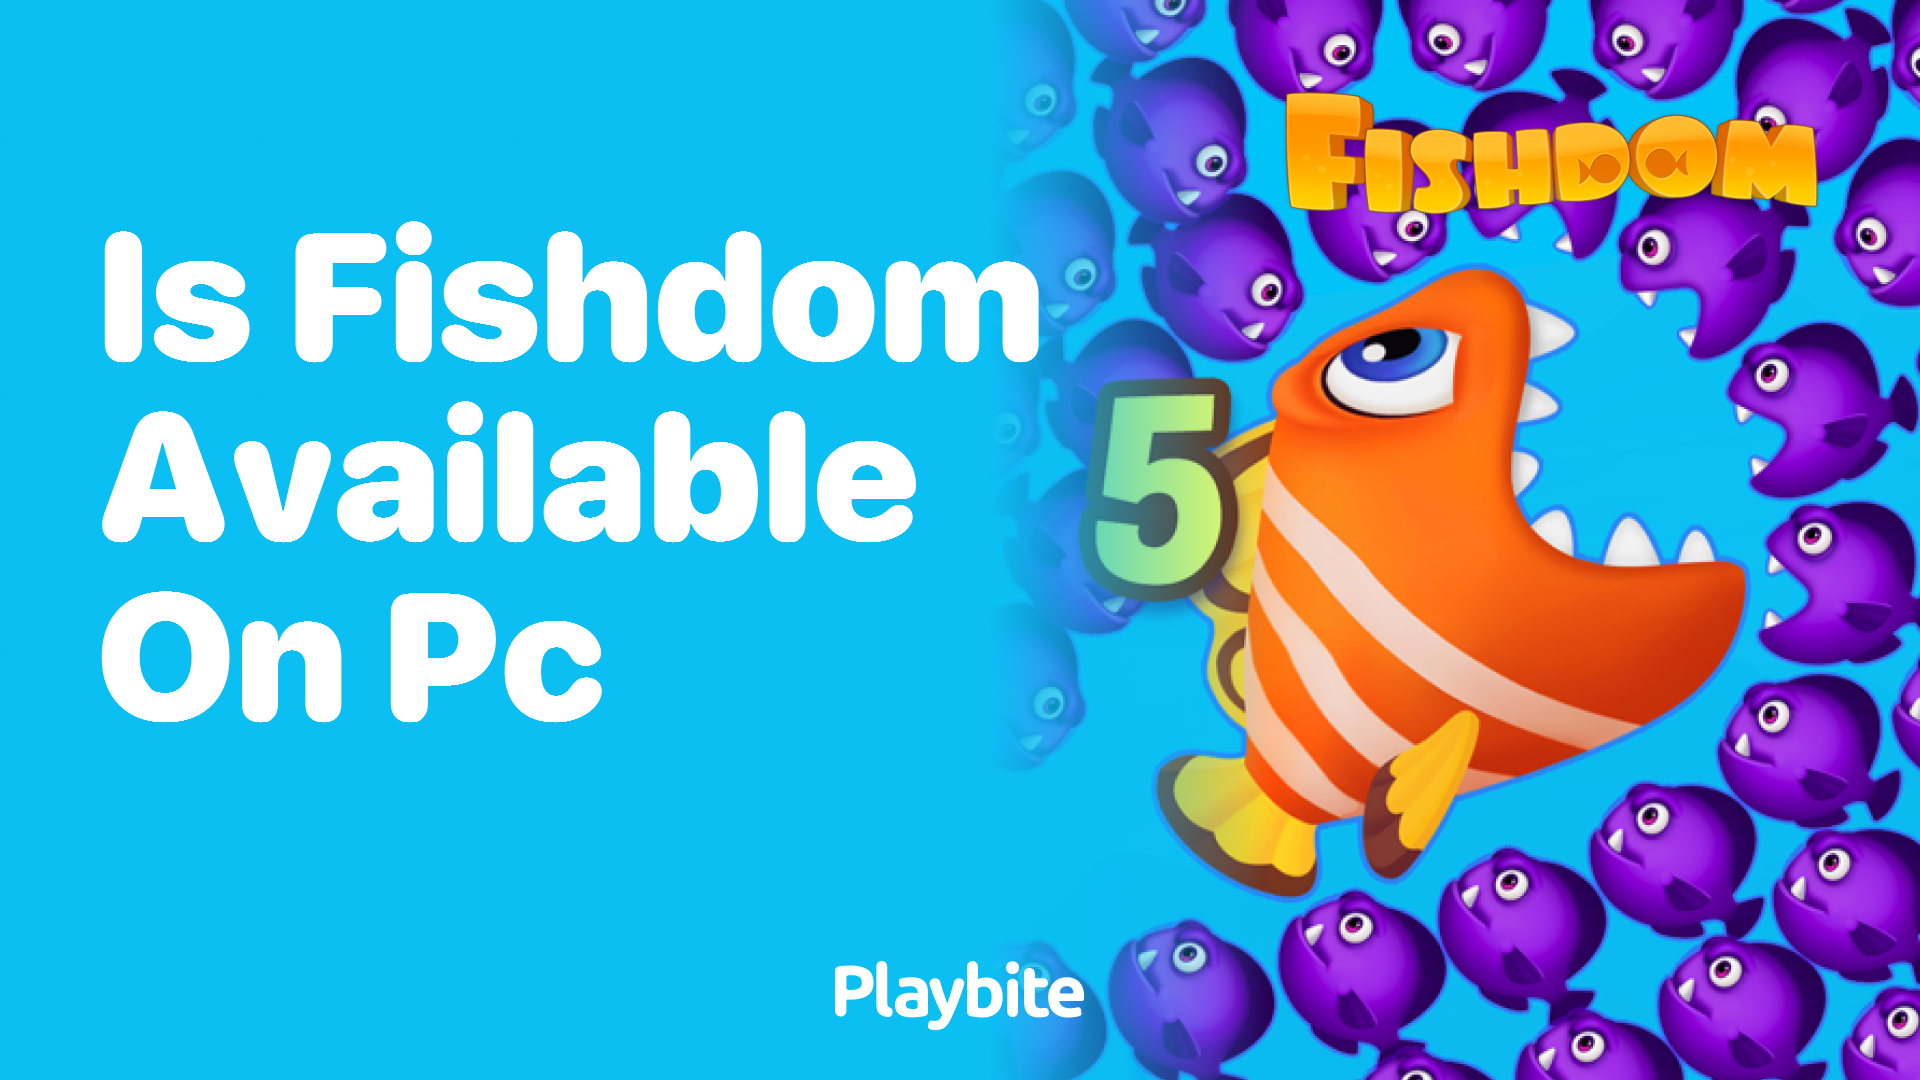 Is Fishdom Available on PC?